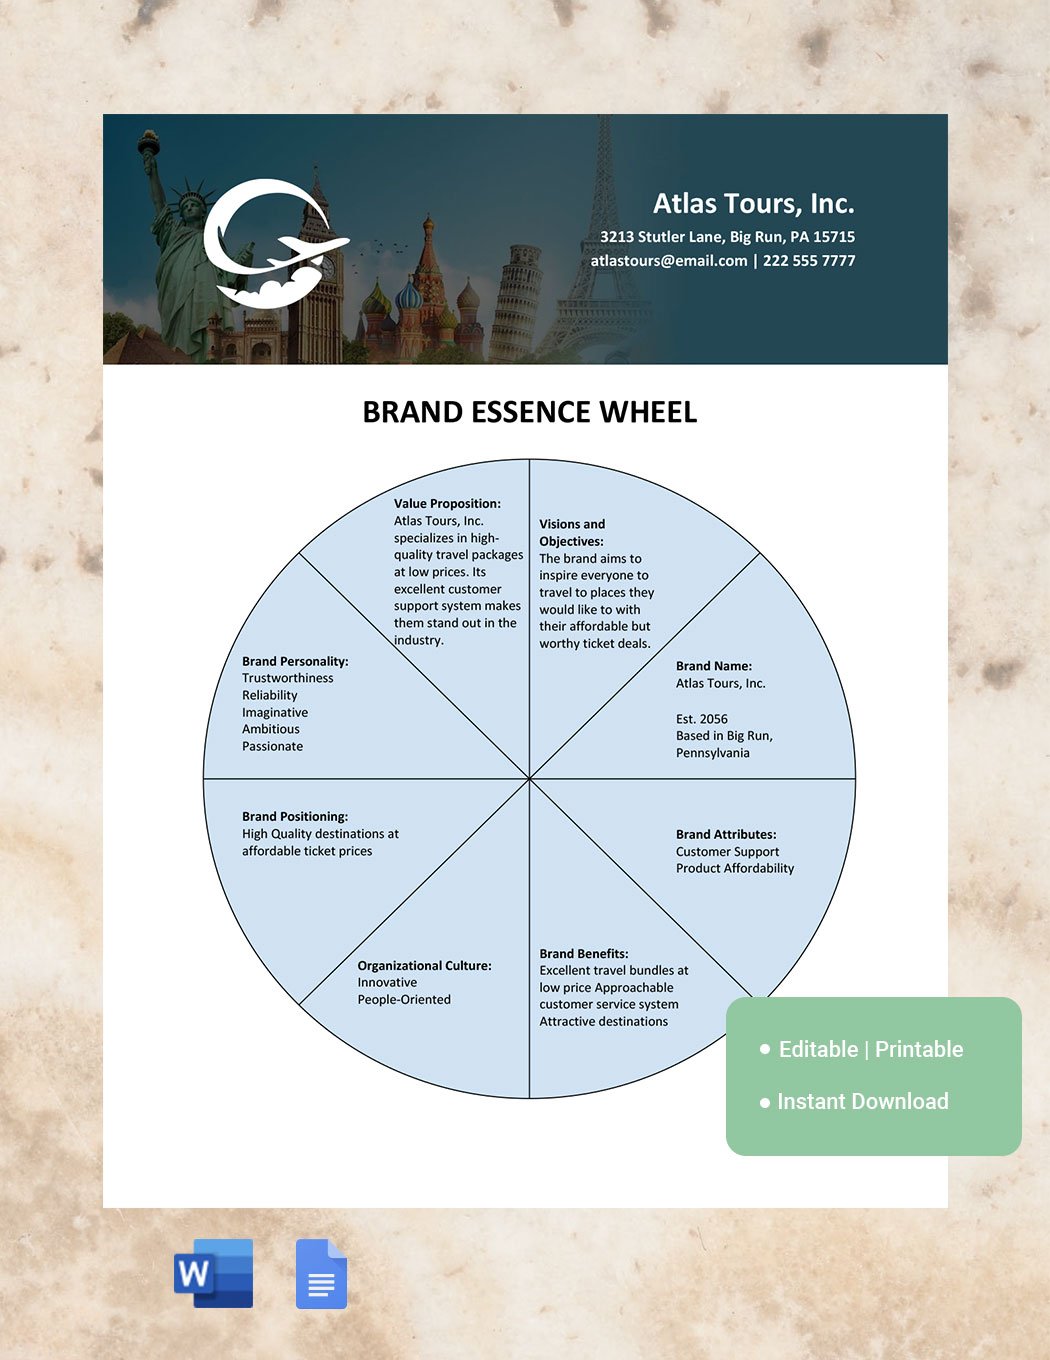 Free Brand Essence Wheel Template Download in Word, Google Docs